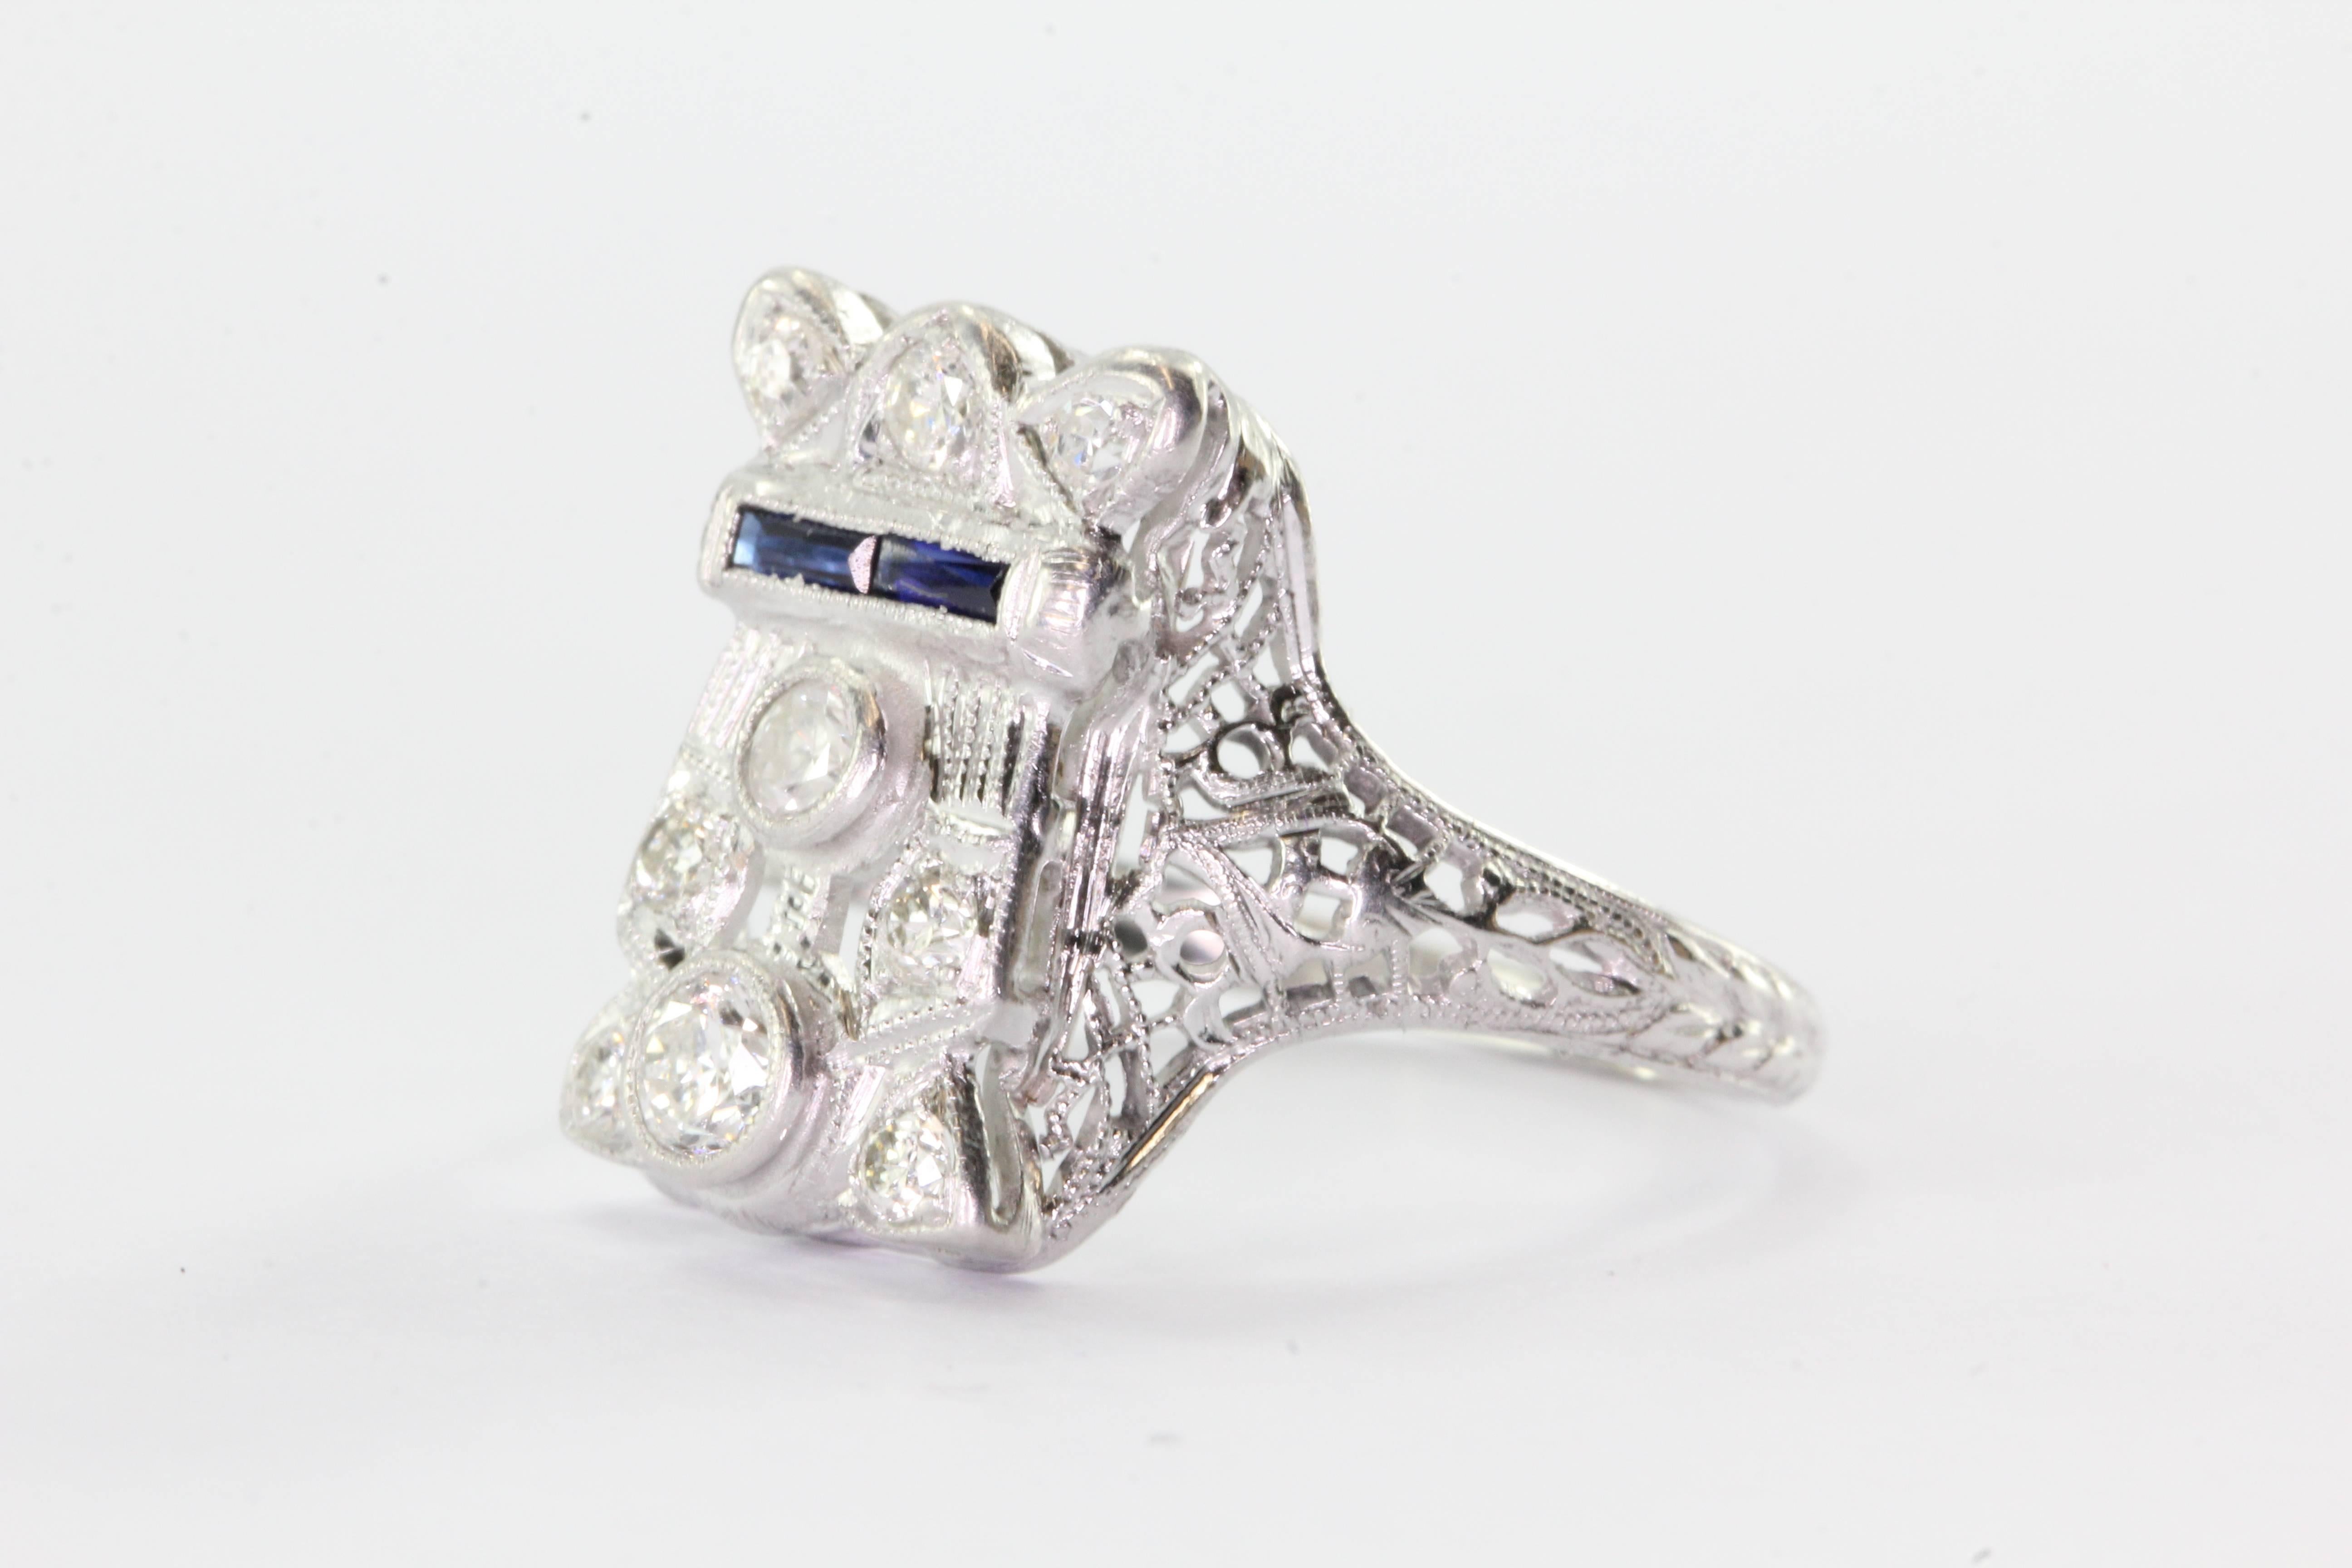 Antique Art Deco 14K White Gold Belais Diamond & Sapphire Ring. The ring is in excellent estate condition and ready to wear. It is signed BELAIS 14K. It is set with some single cut, old European cut and transition cut diamonds as well as a band of